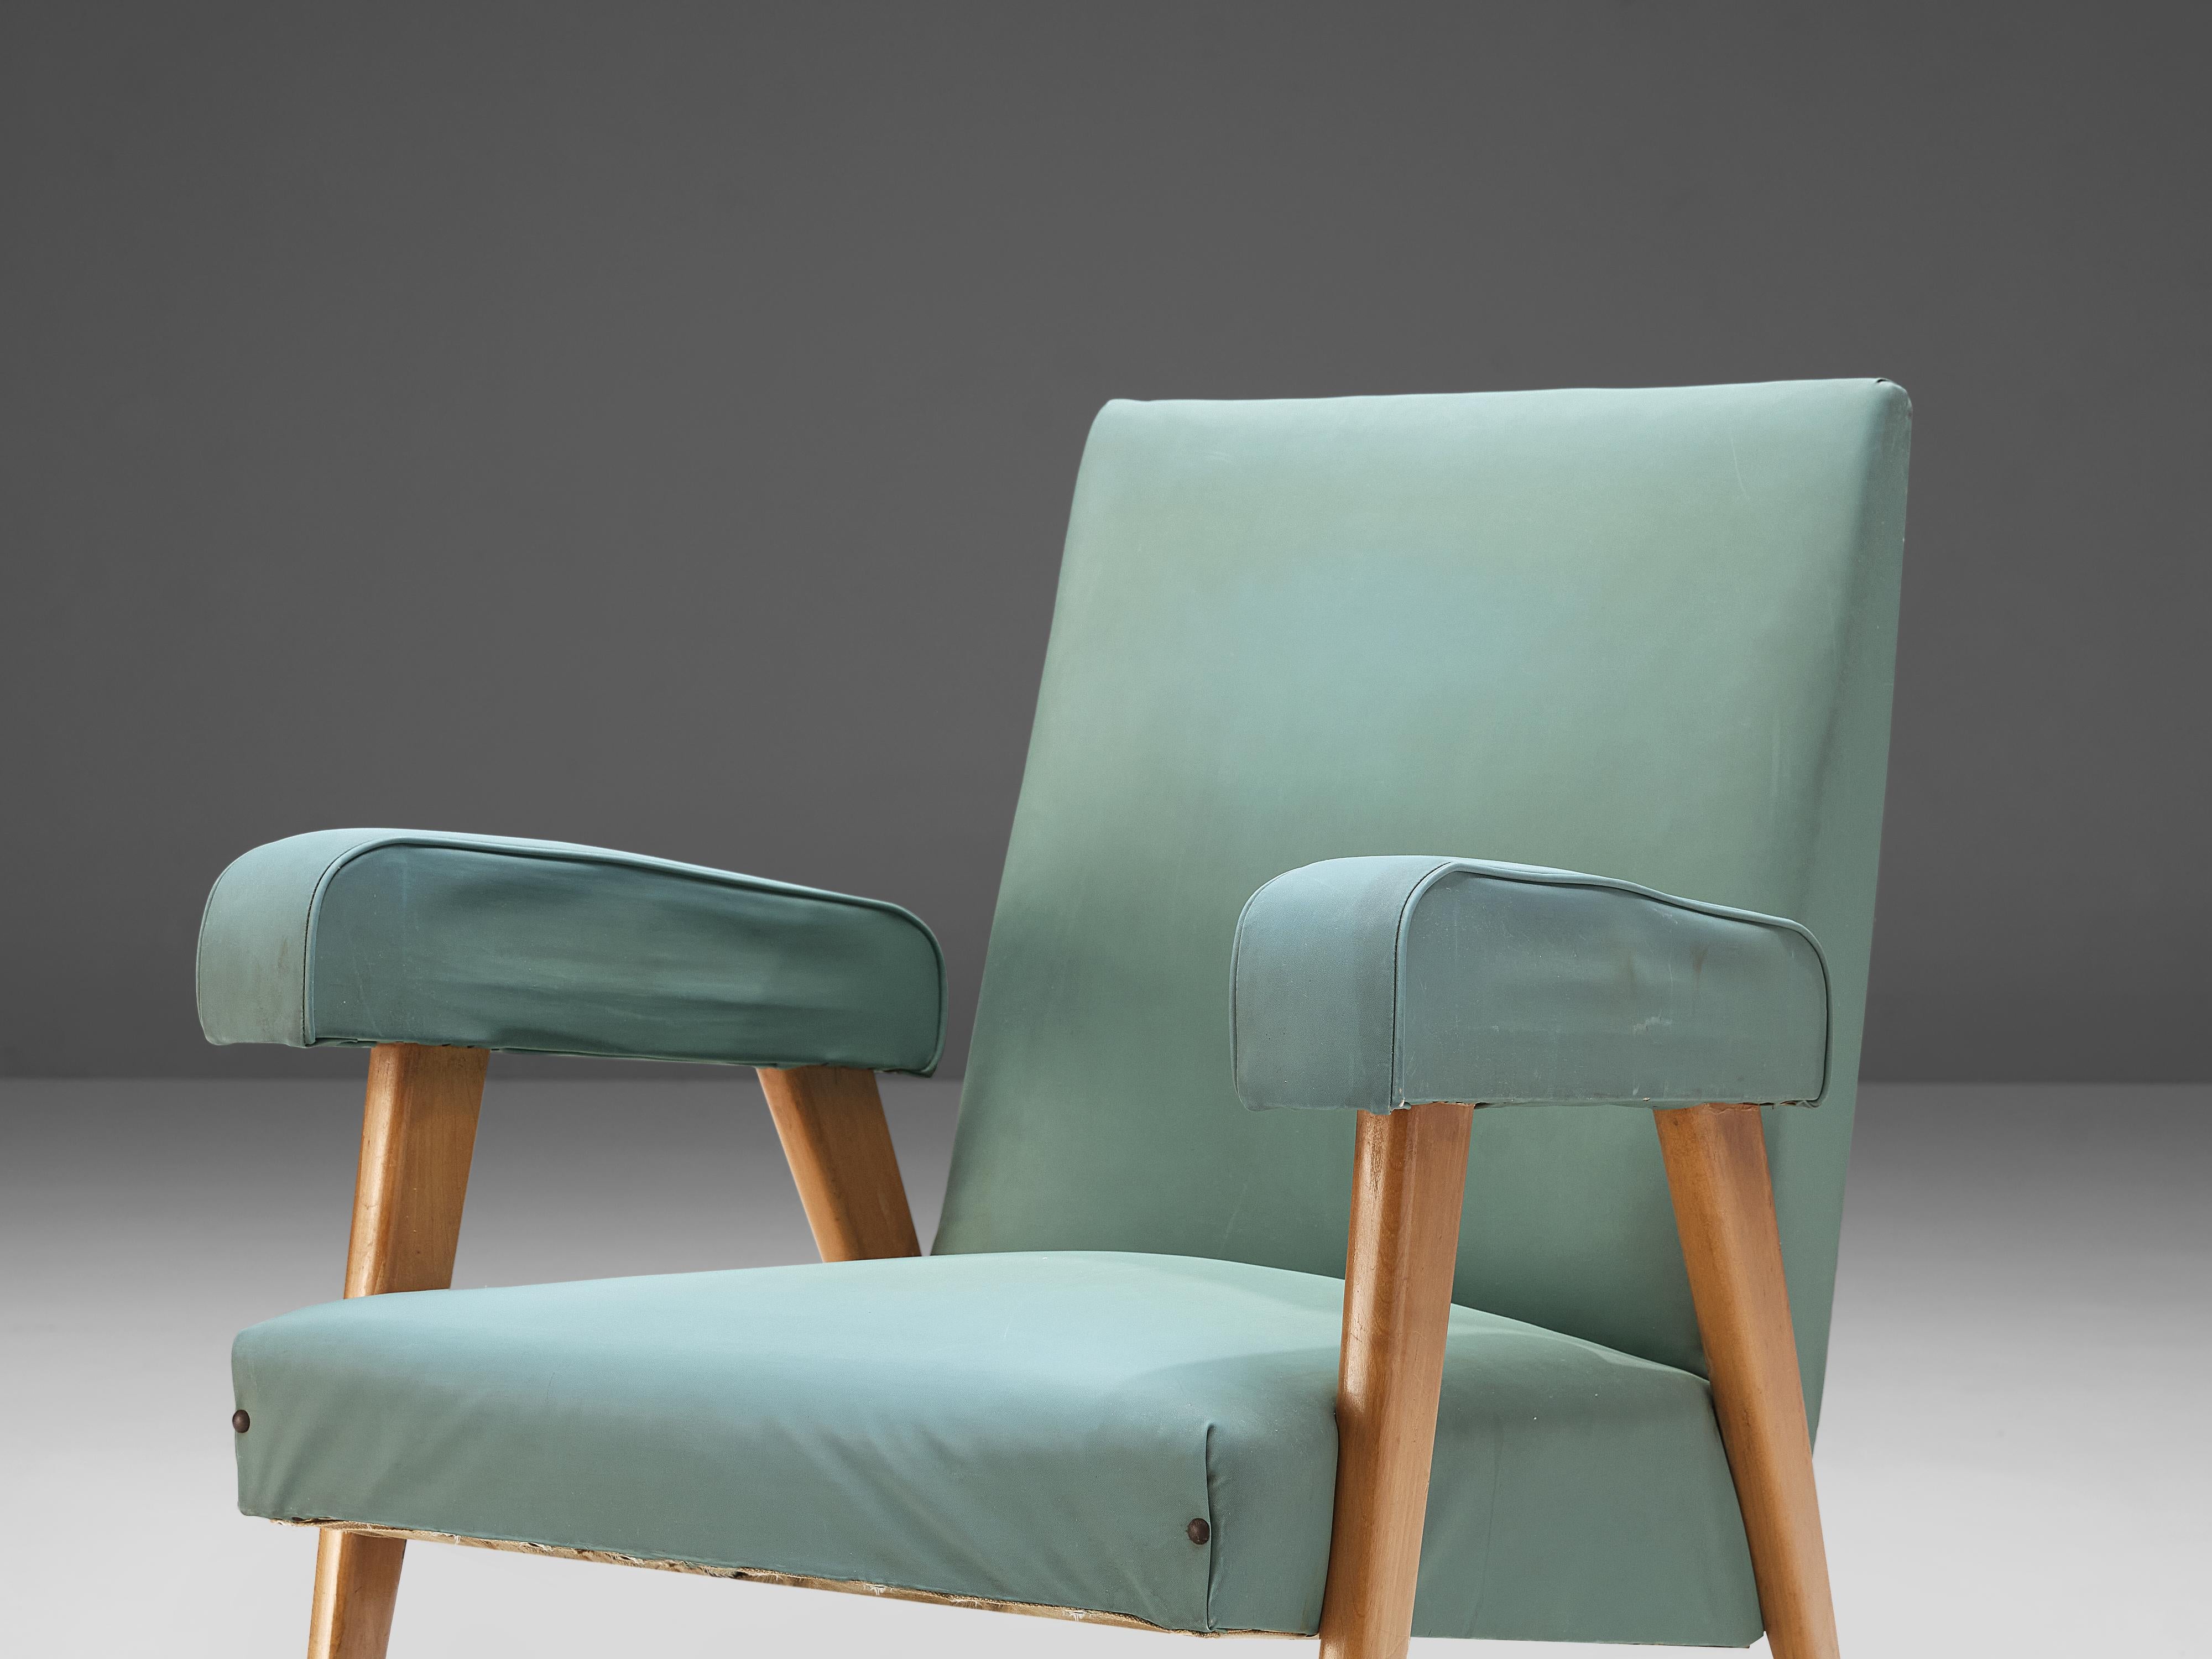 Italian Pair of Lounge Chairs in Blue and Mint Green Upholstery and Cherry